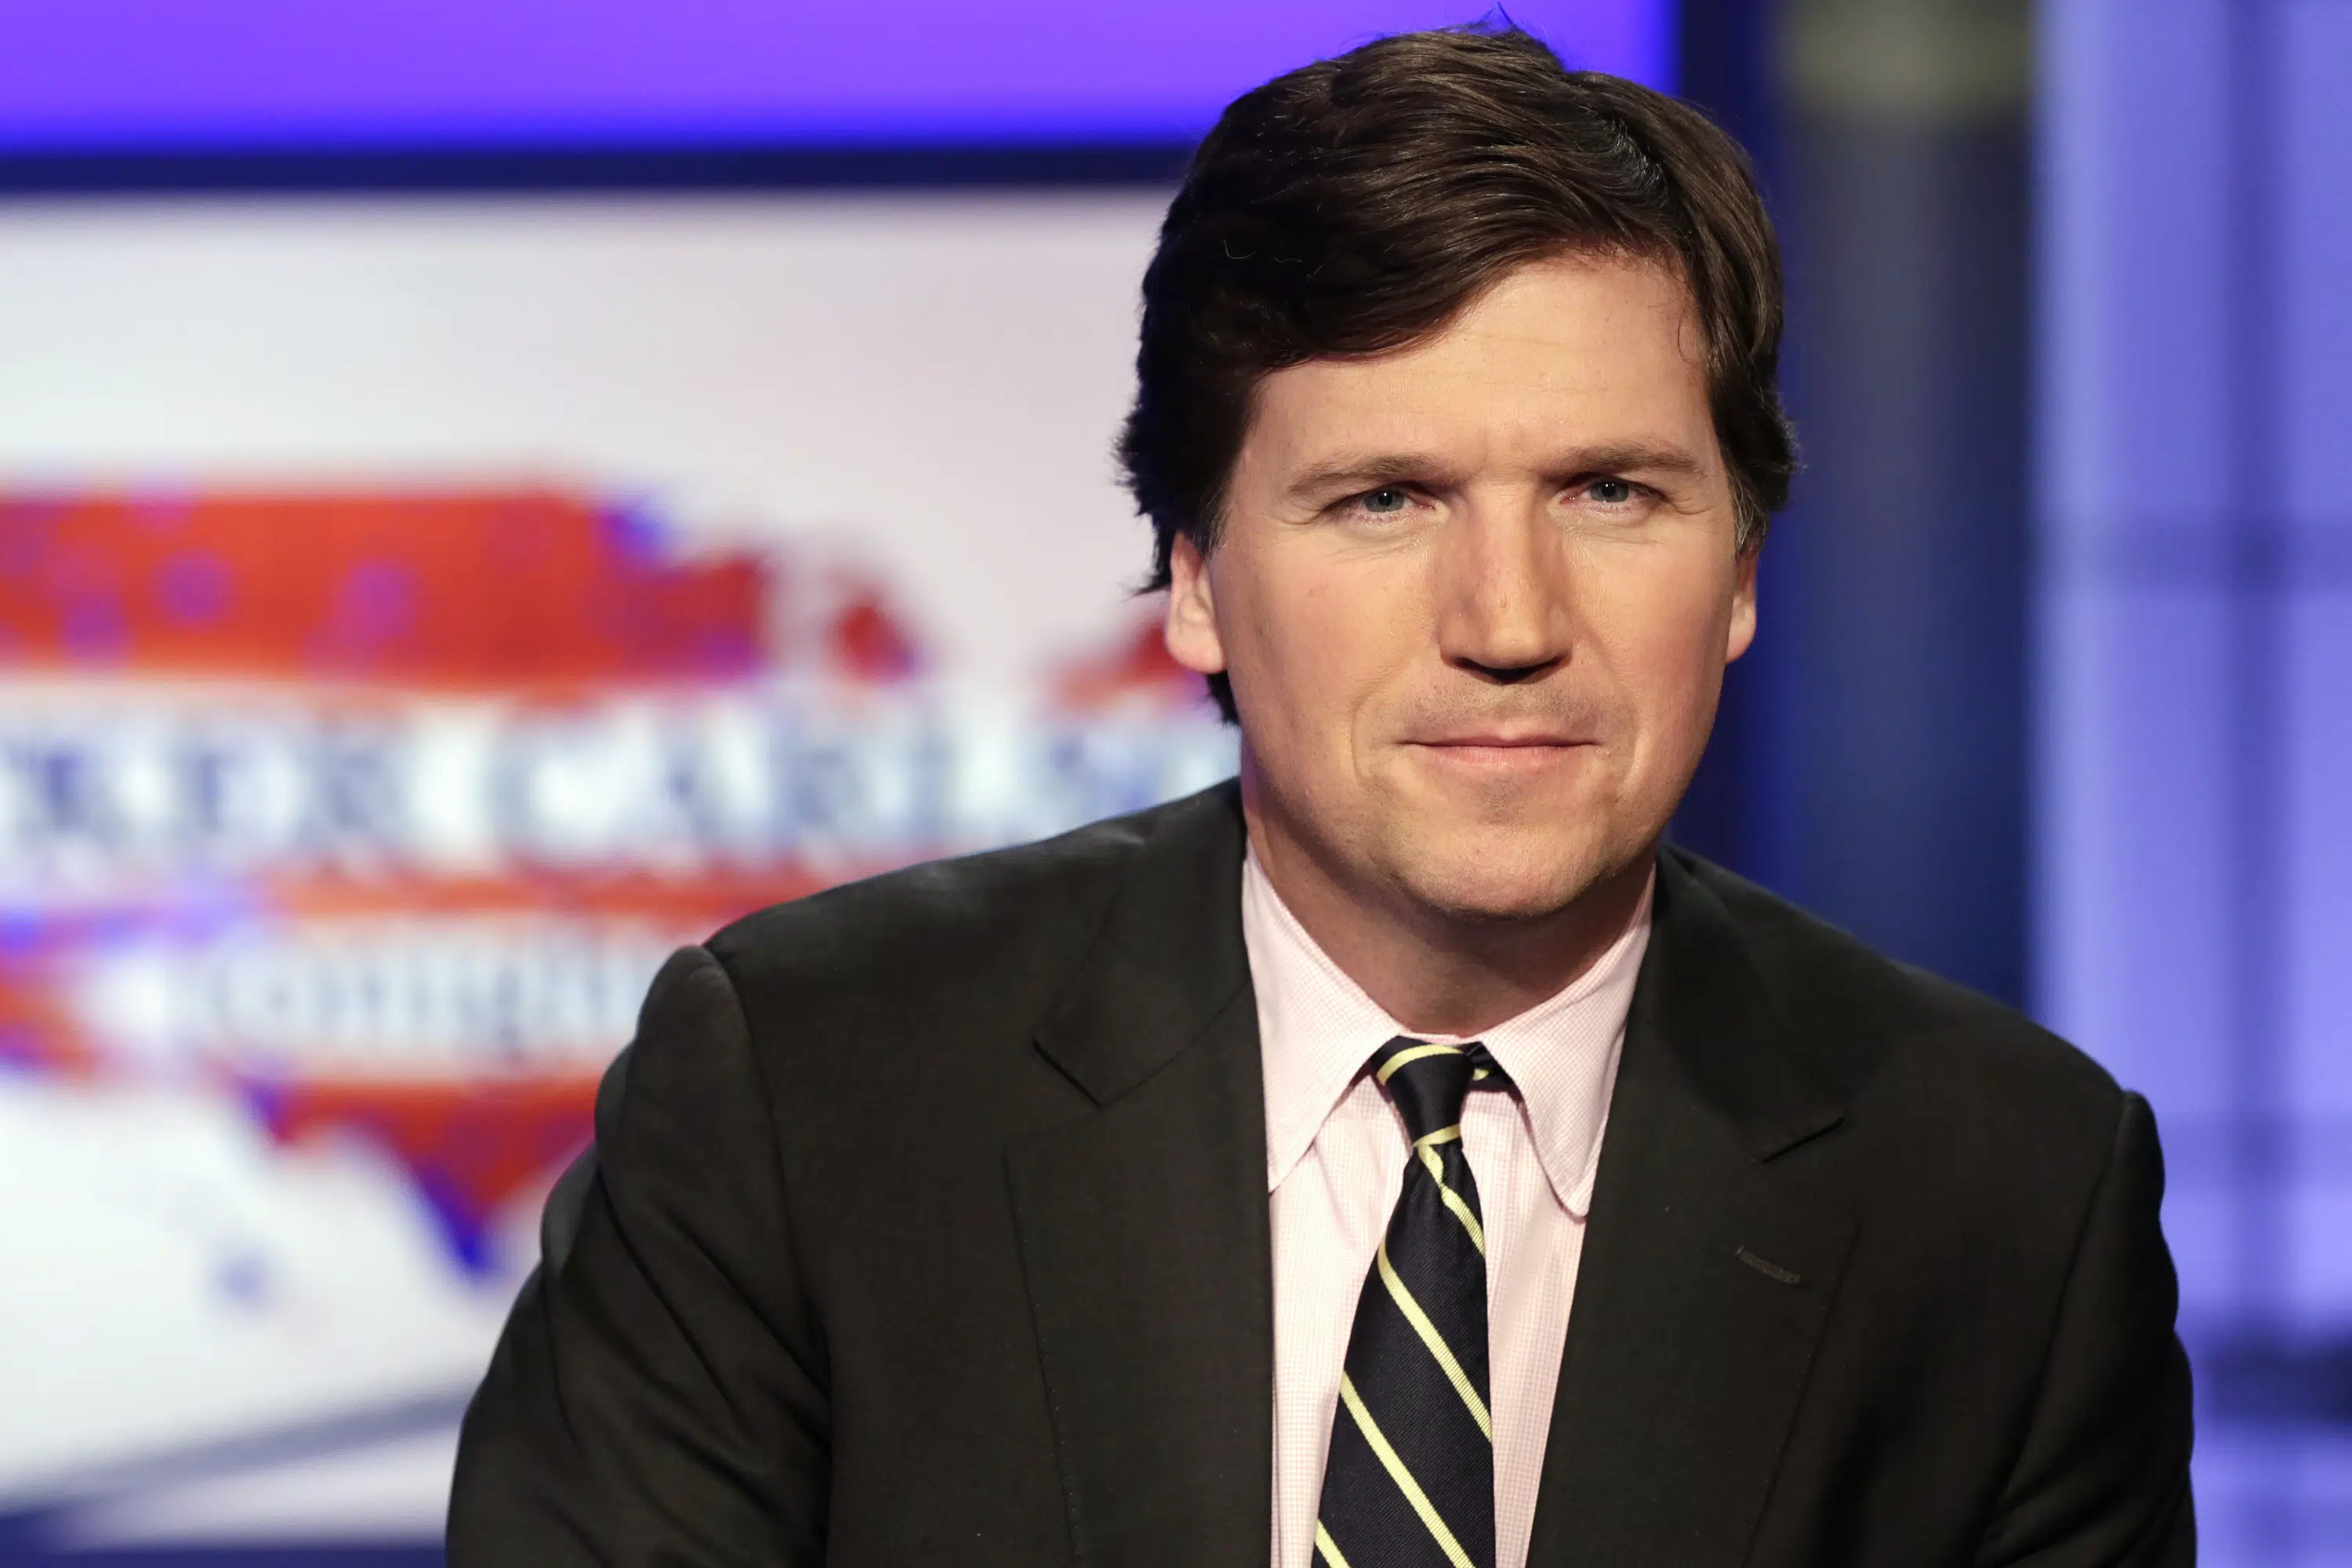 Tucker Carlson speaks out for 1st time after Fox News firing TrendRadars